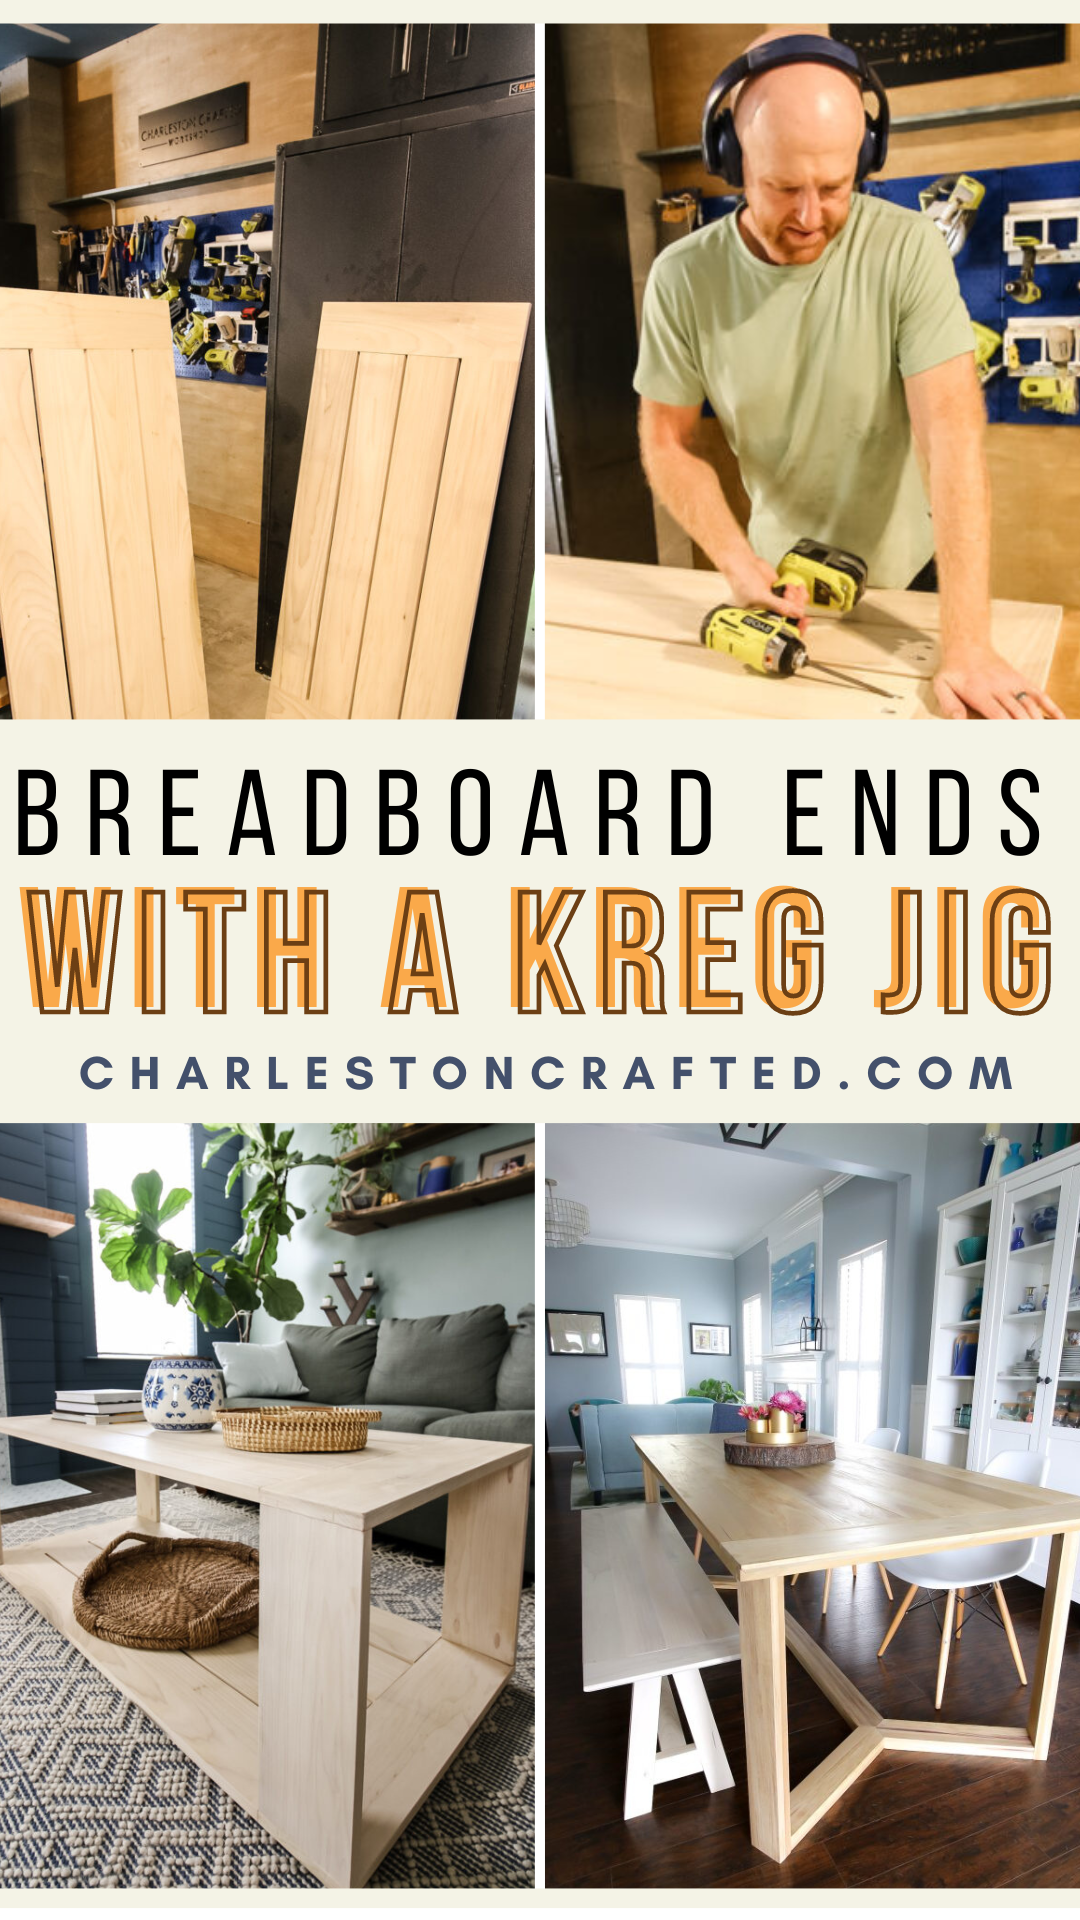 Breadboard ends with a Kreg jig - Charleston Crafted